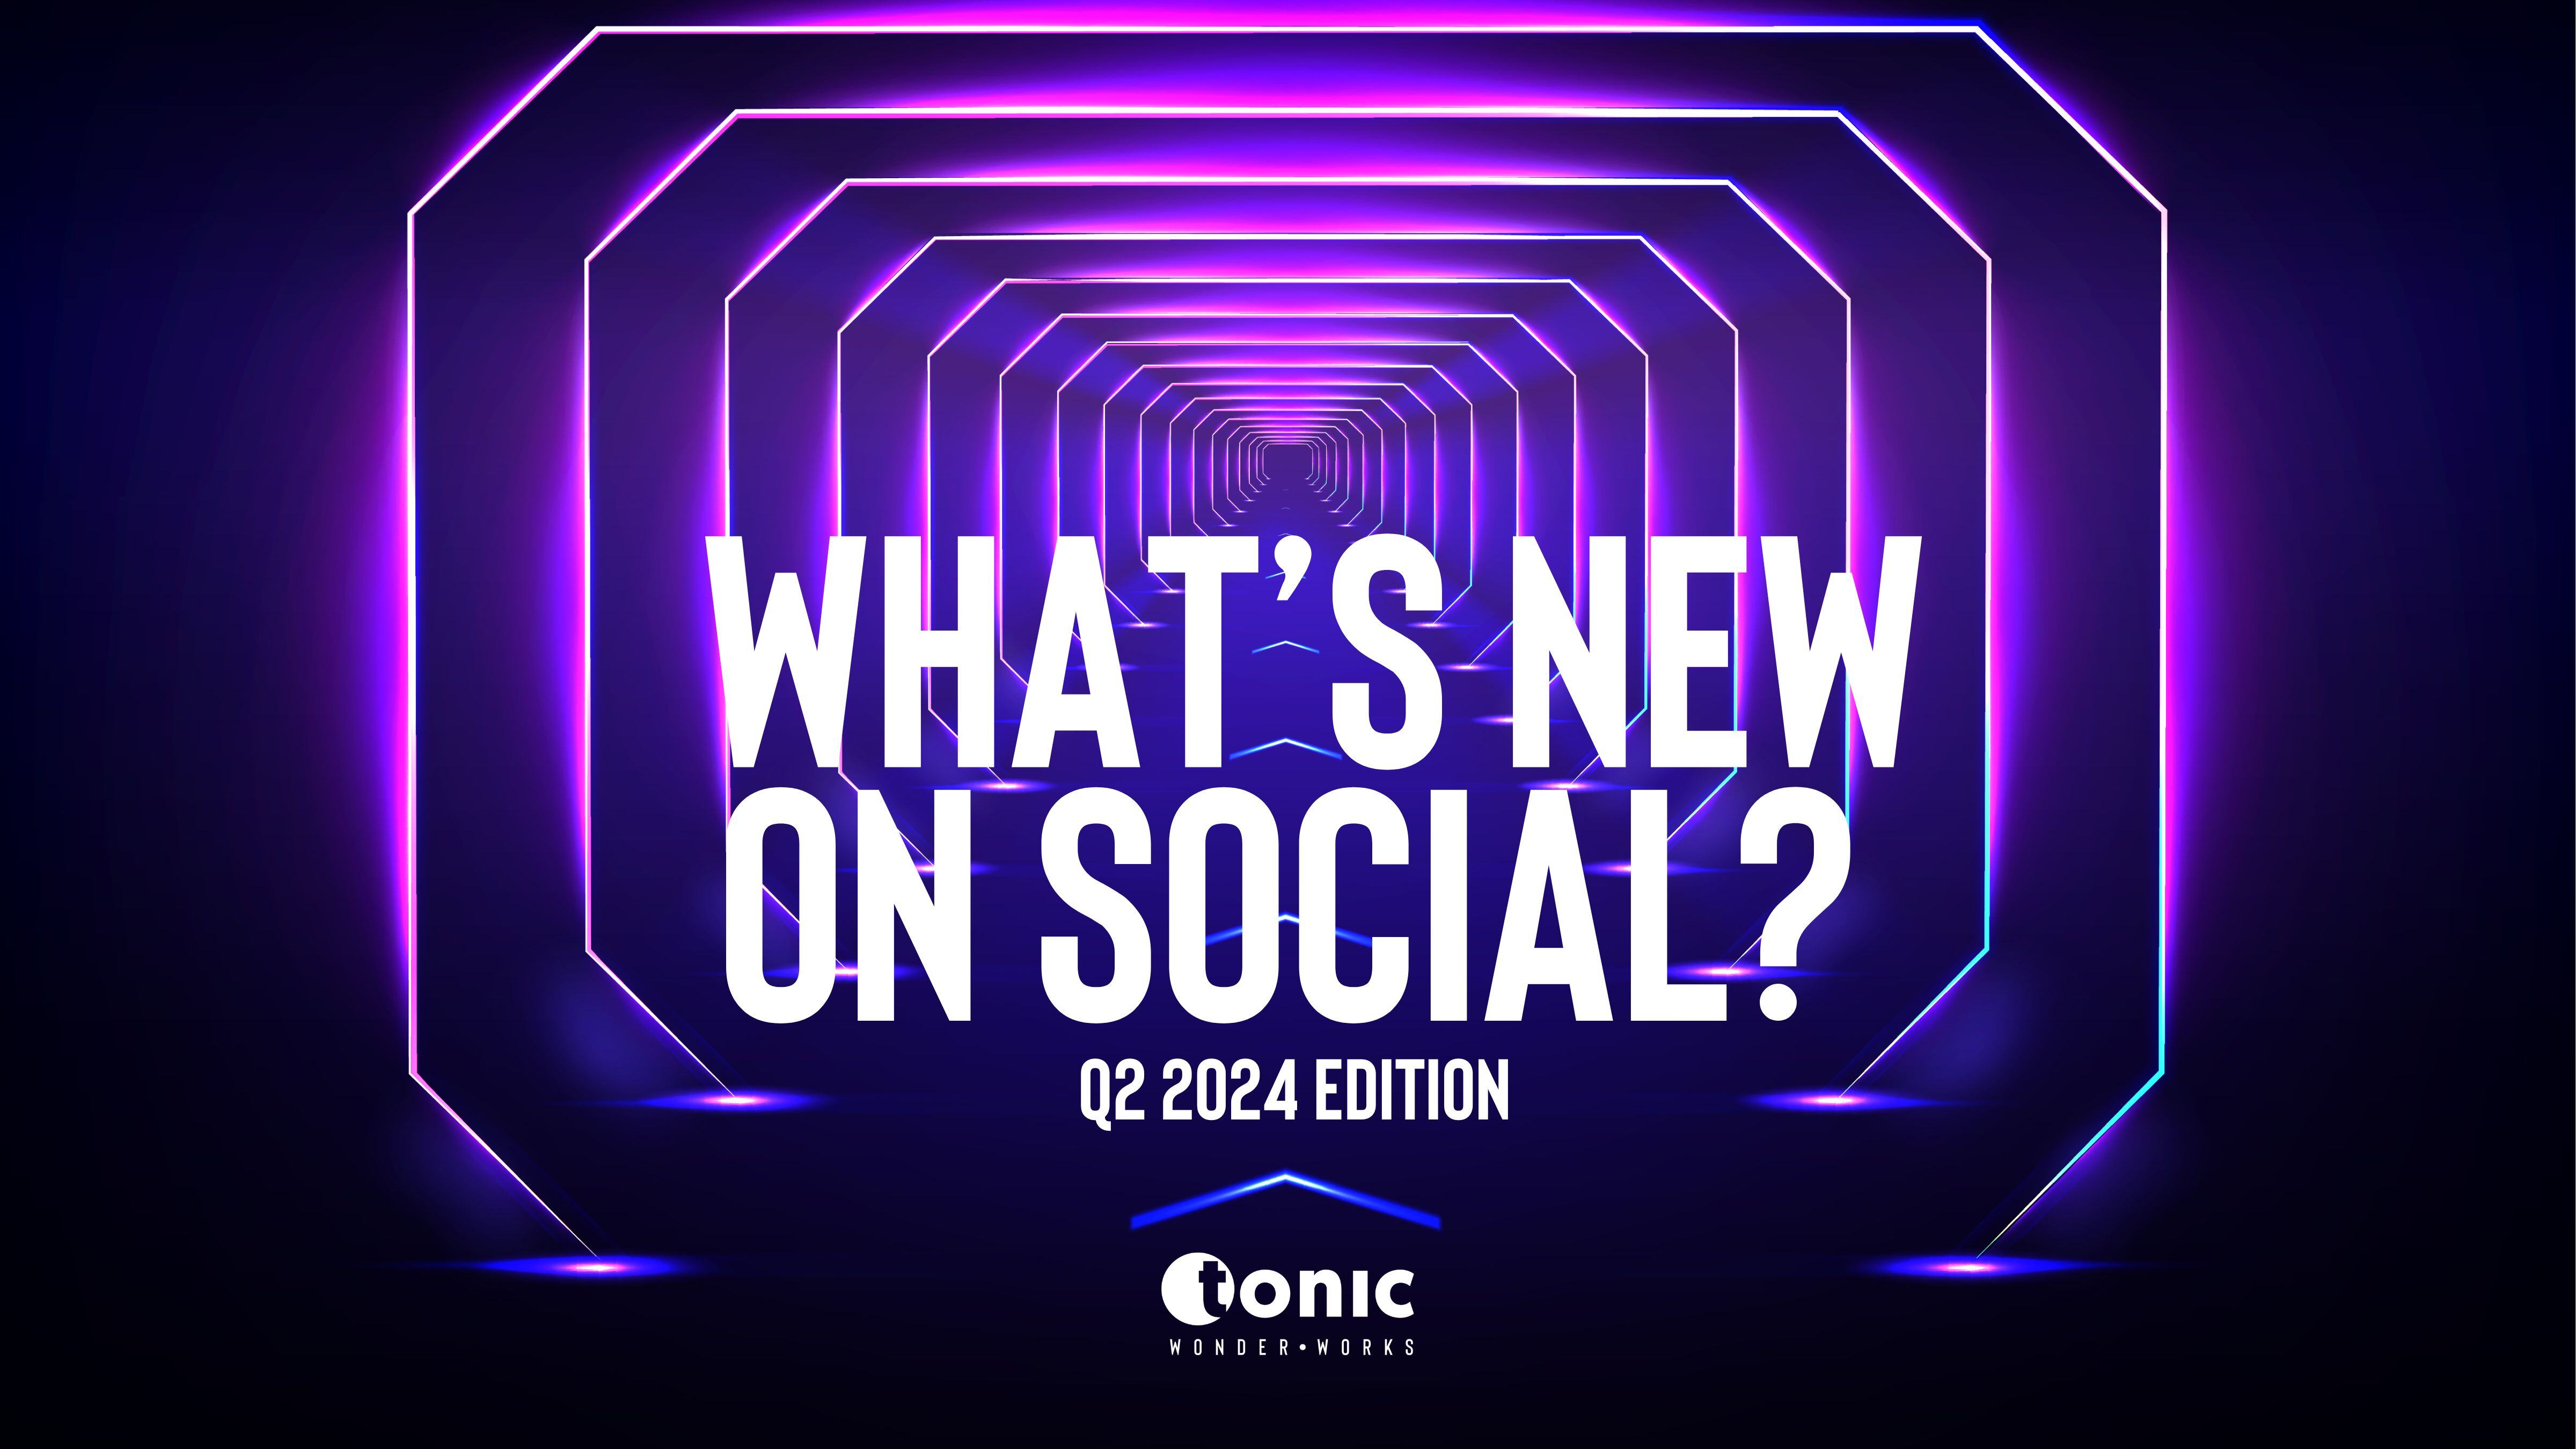 What’s new on Social Media? Q2 2024 Edition